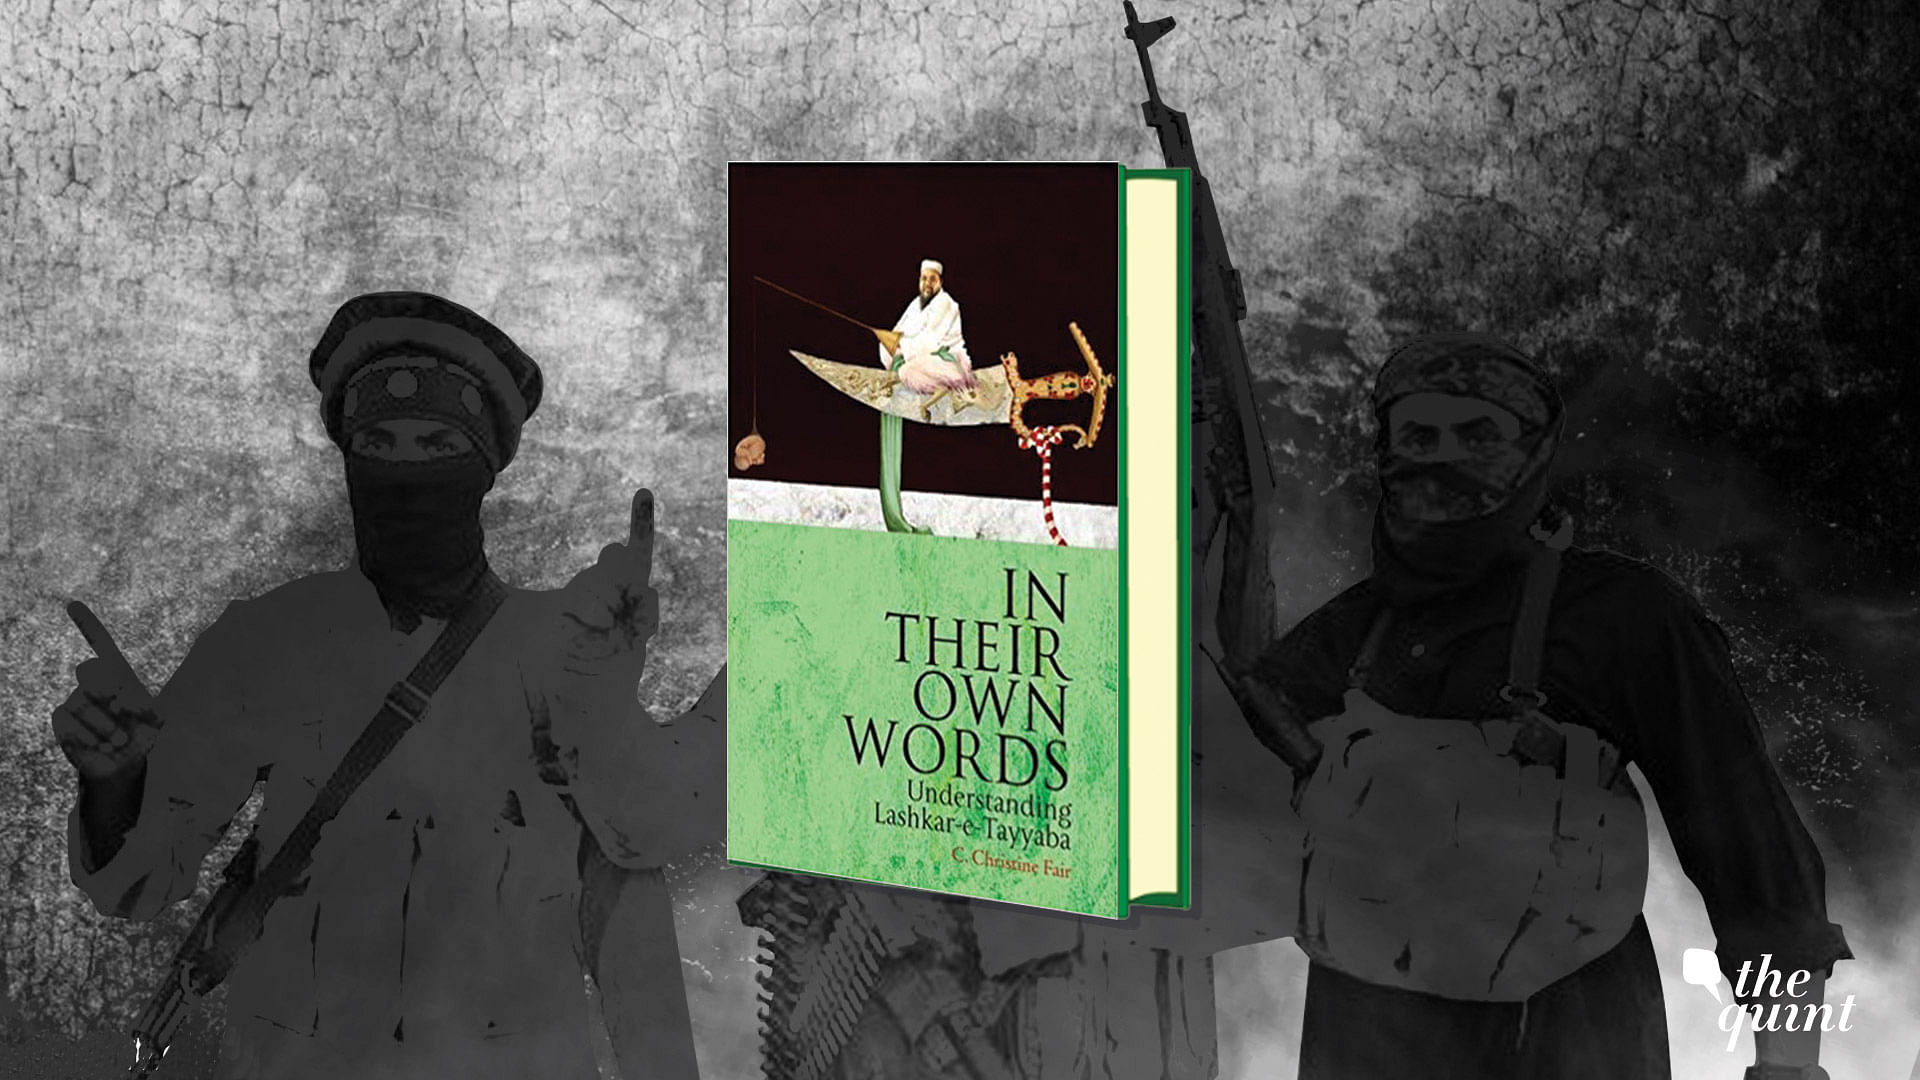 Image of the book cover, and militants used for representational purposes.